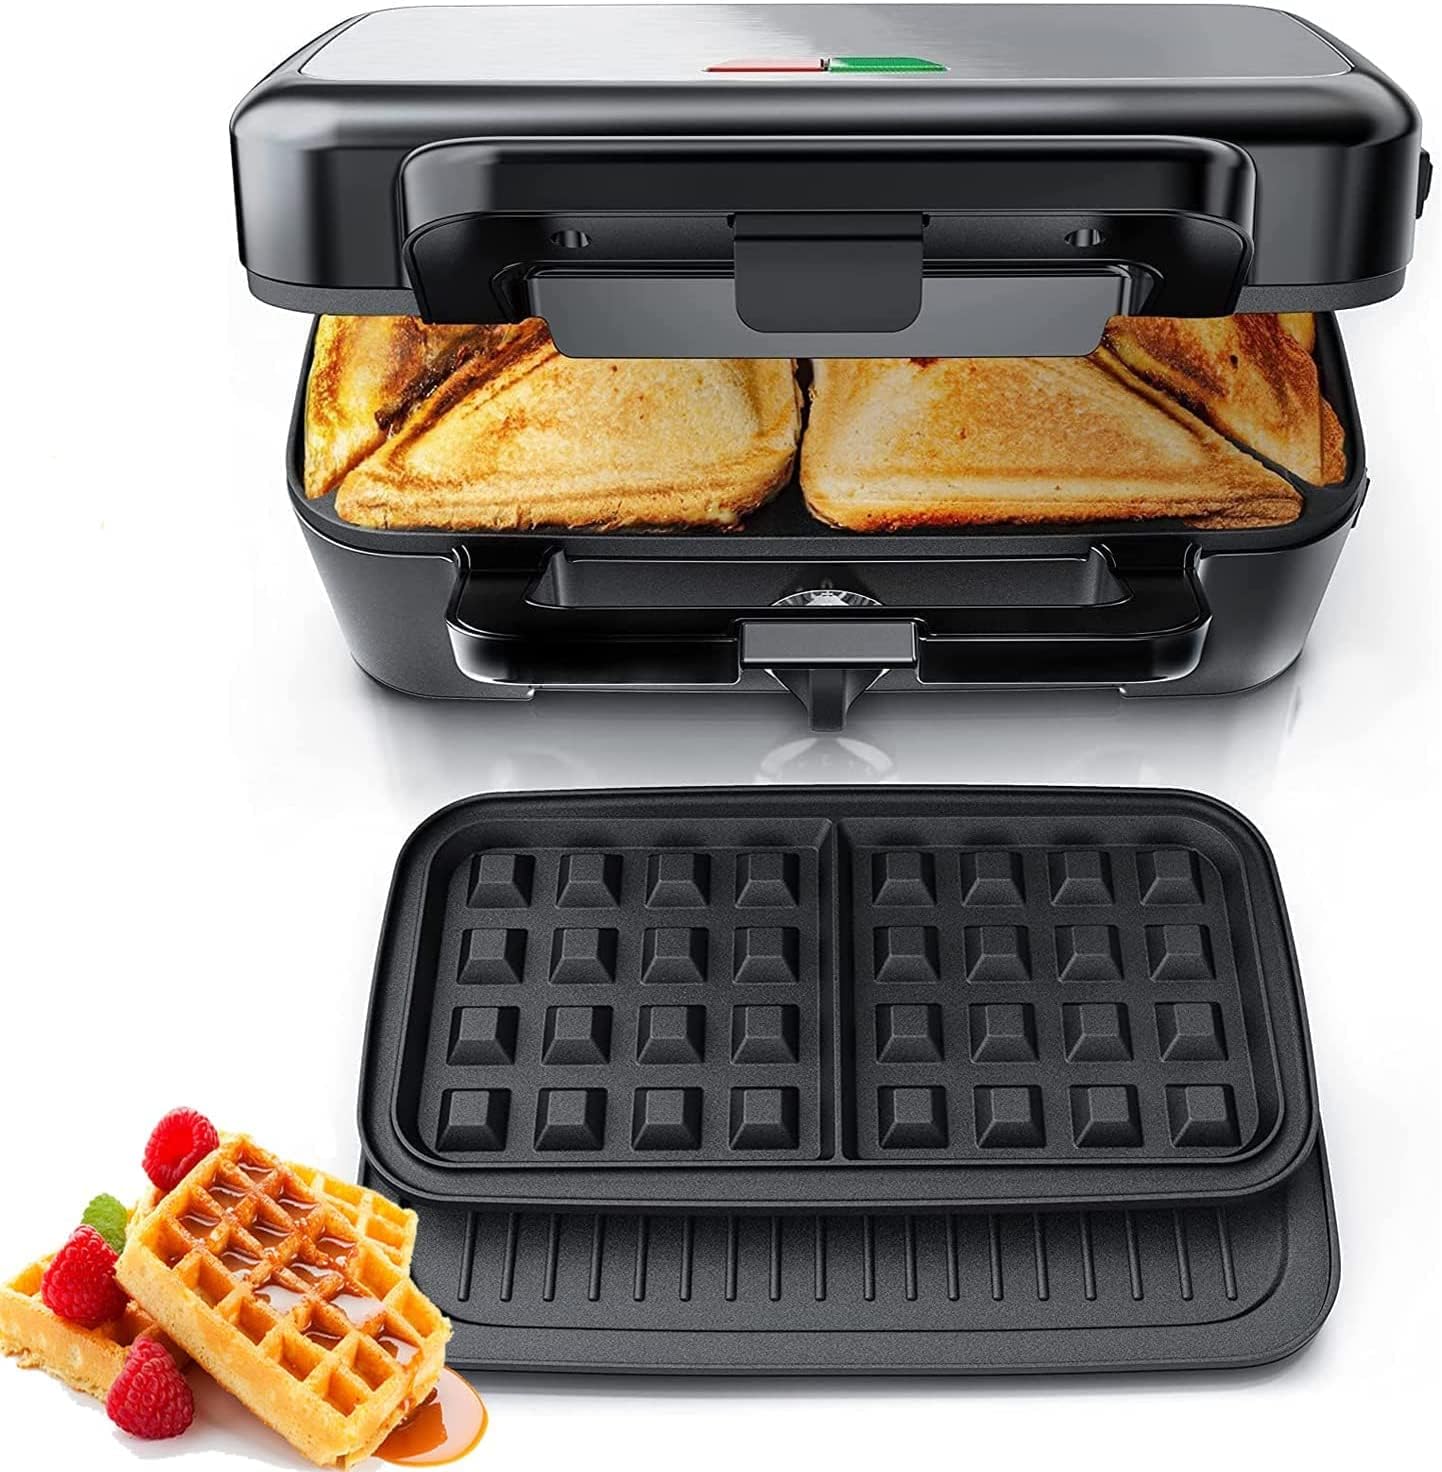 How To Know If A Waffle Iron Has Removable Plates